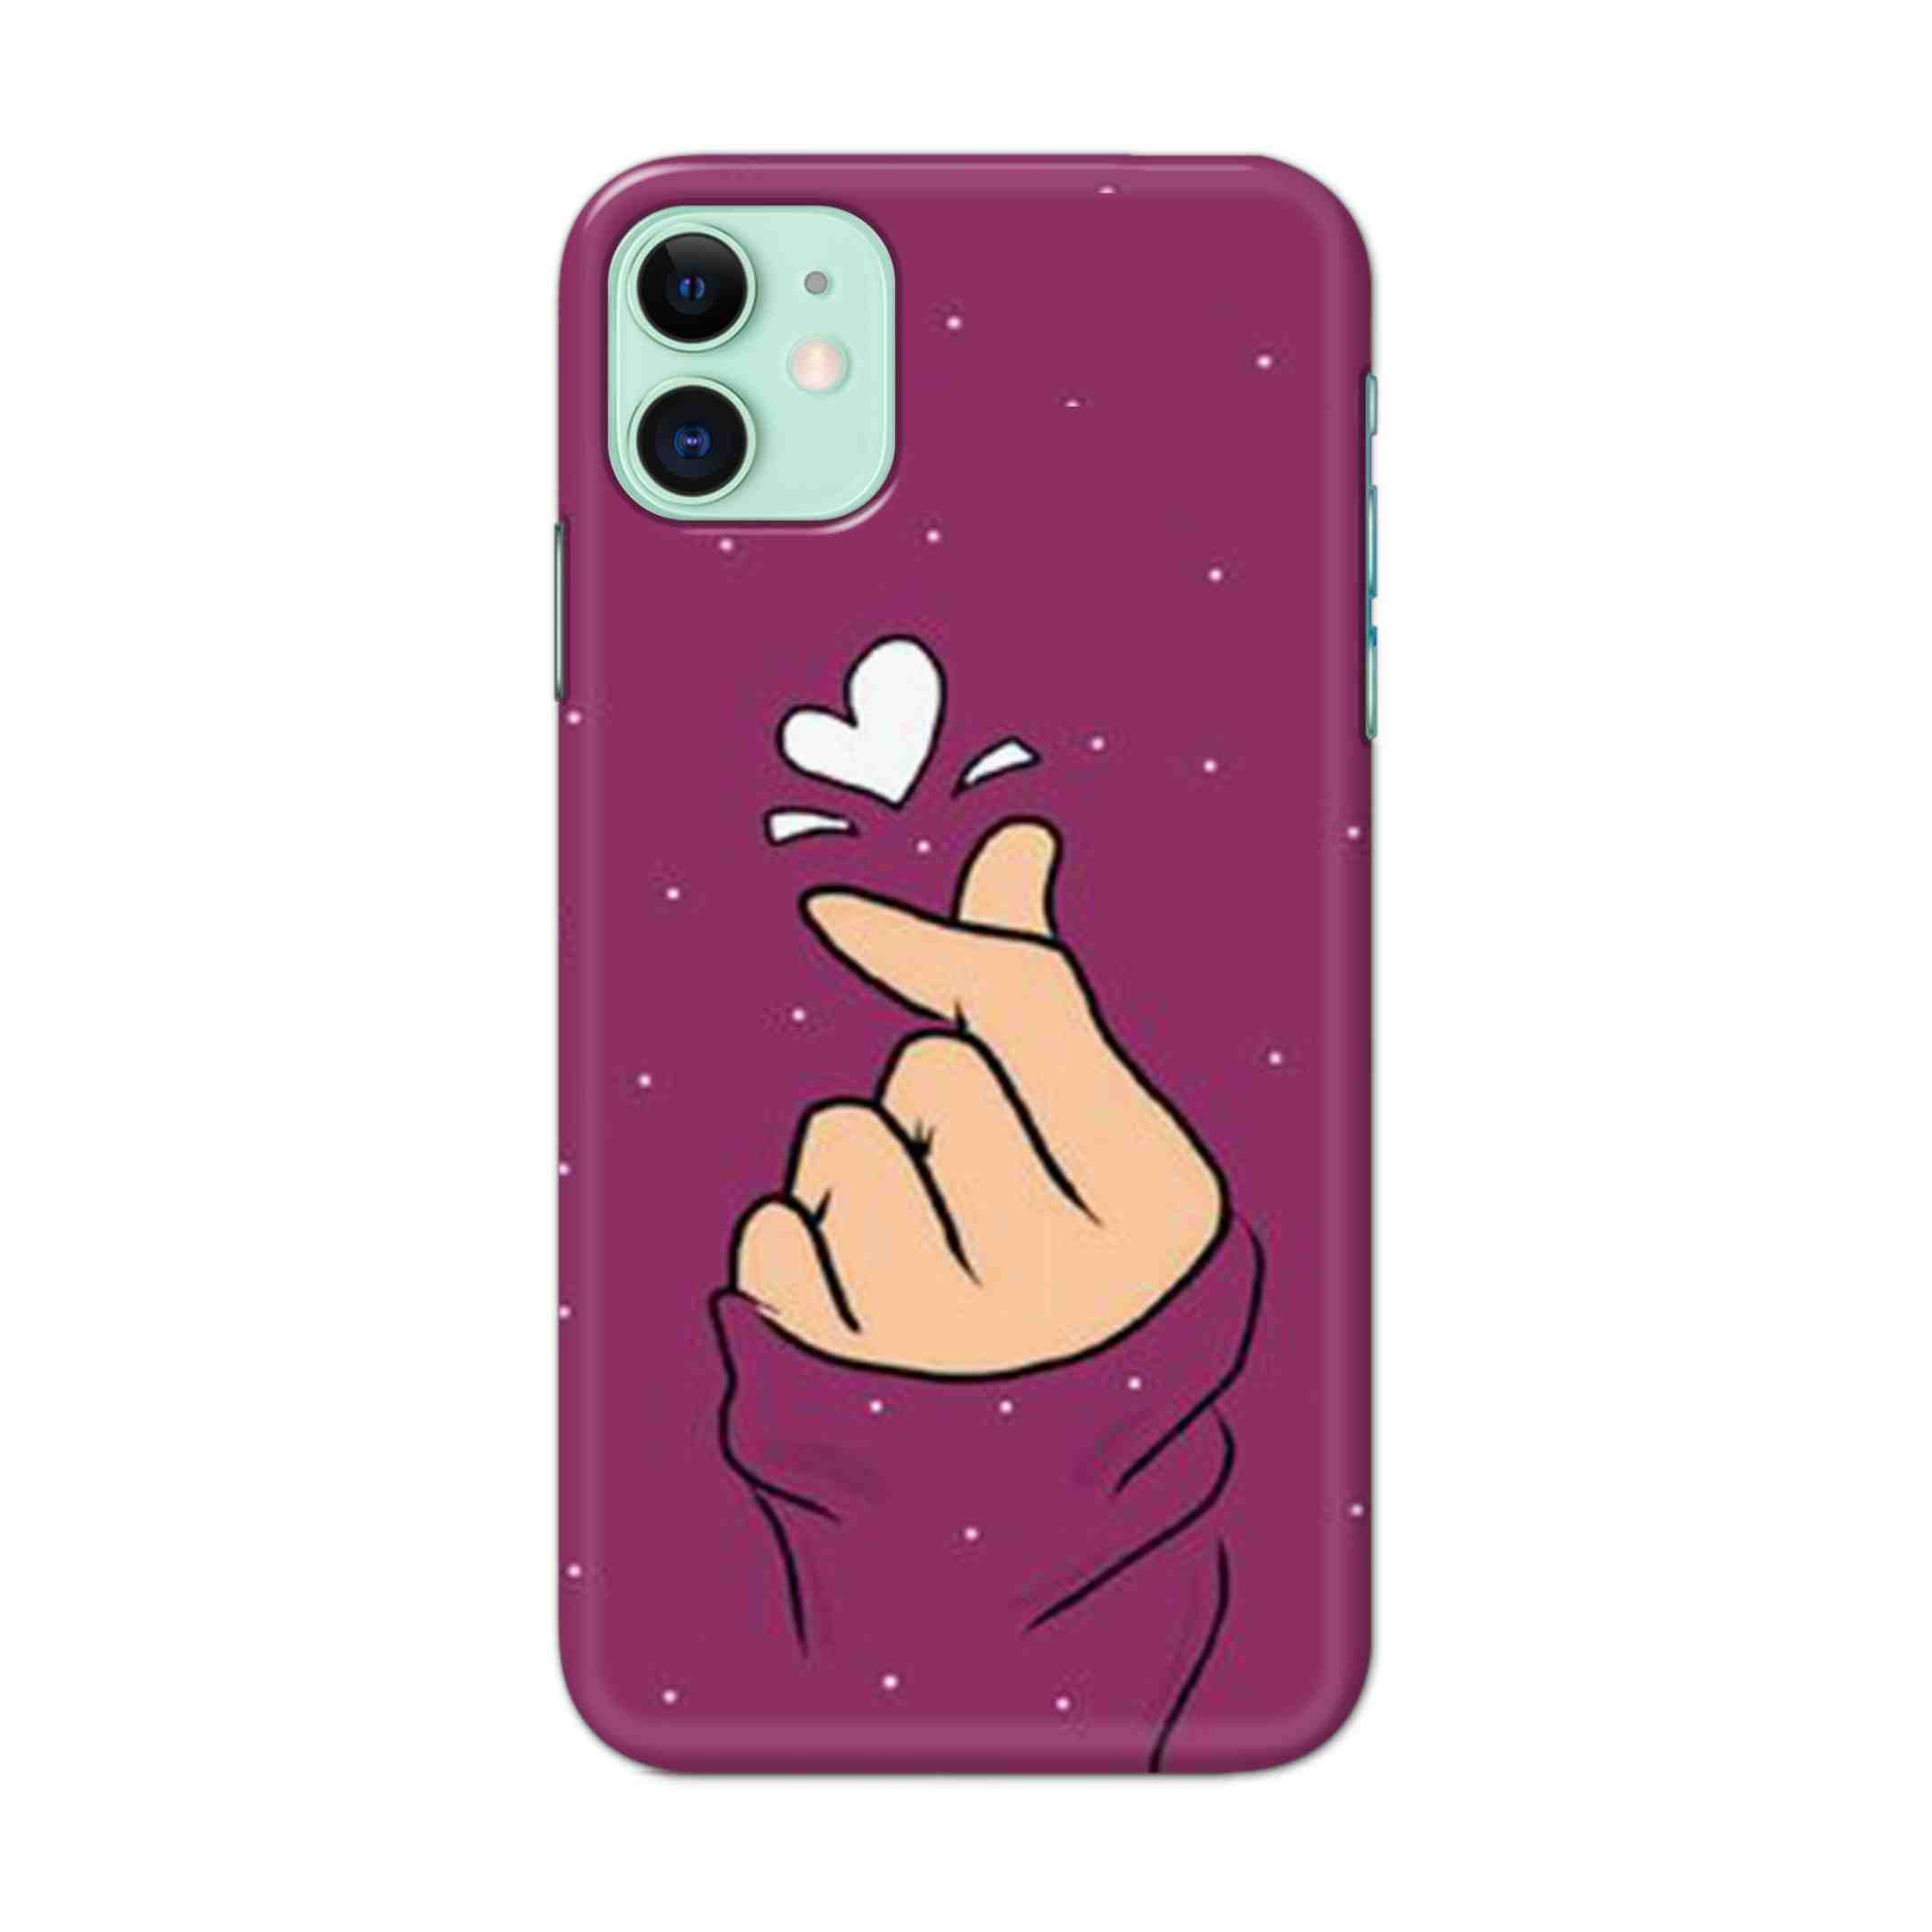 Buy Pink Snip Hard Back Mobile Phone Case Cover For iPhone 11 Online